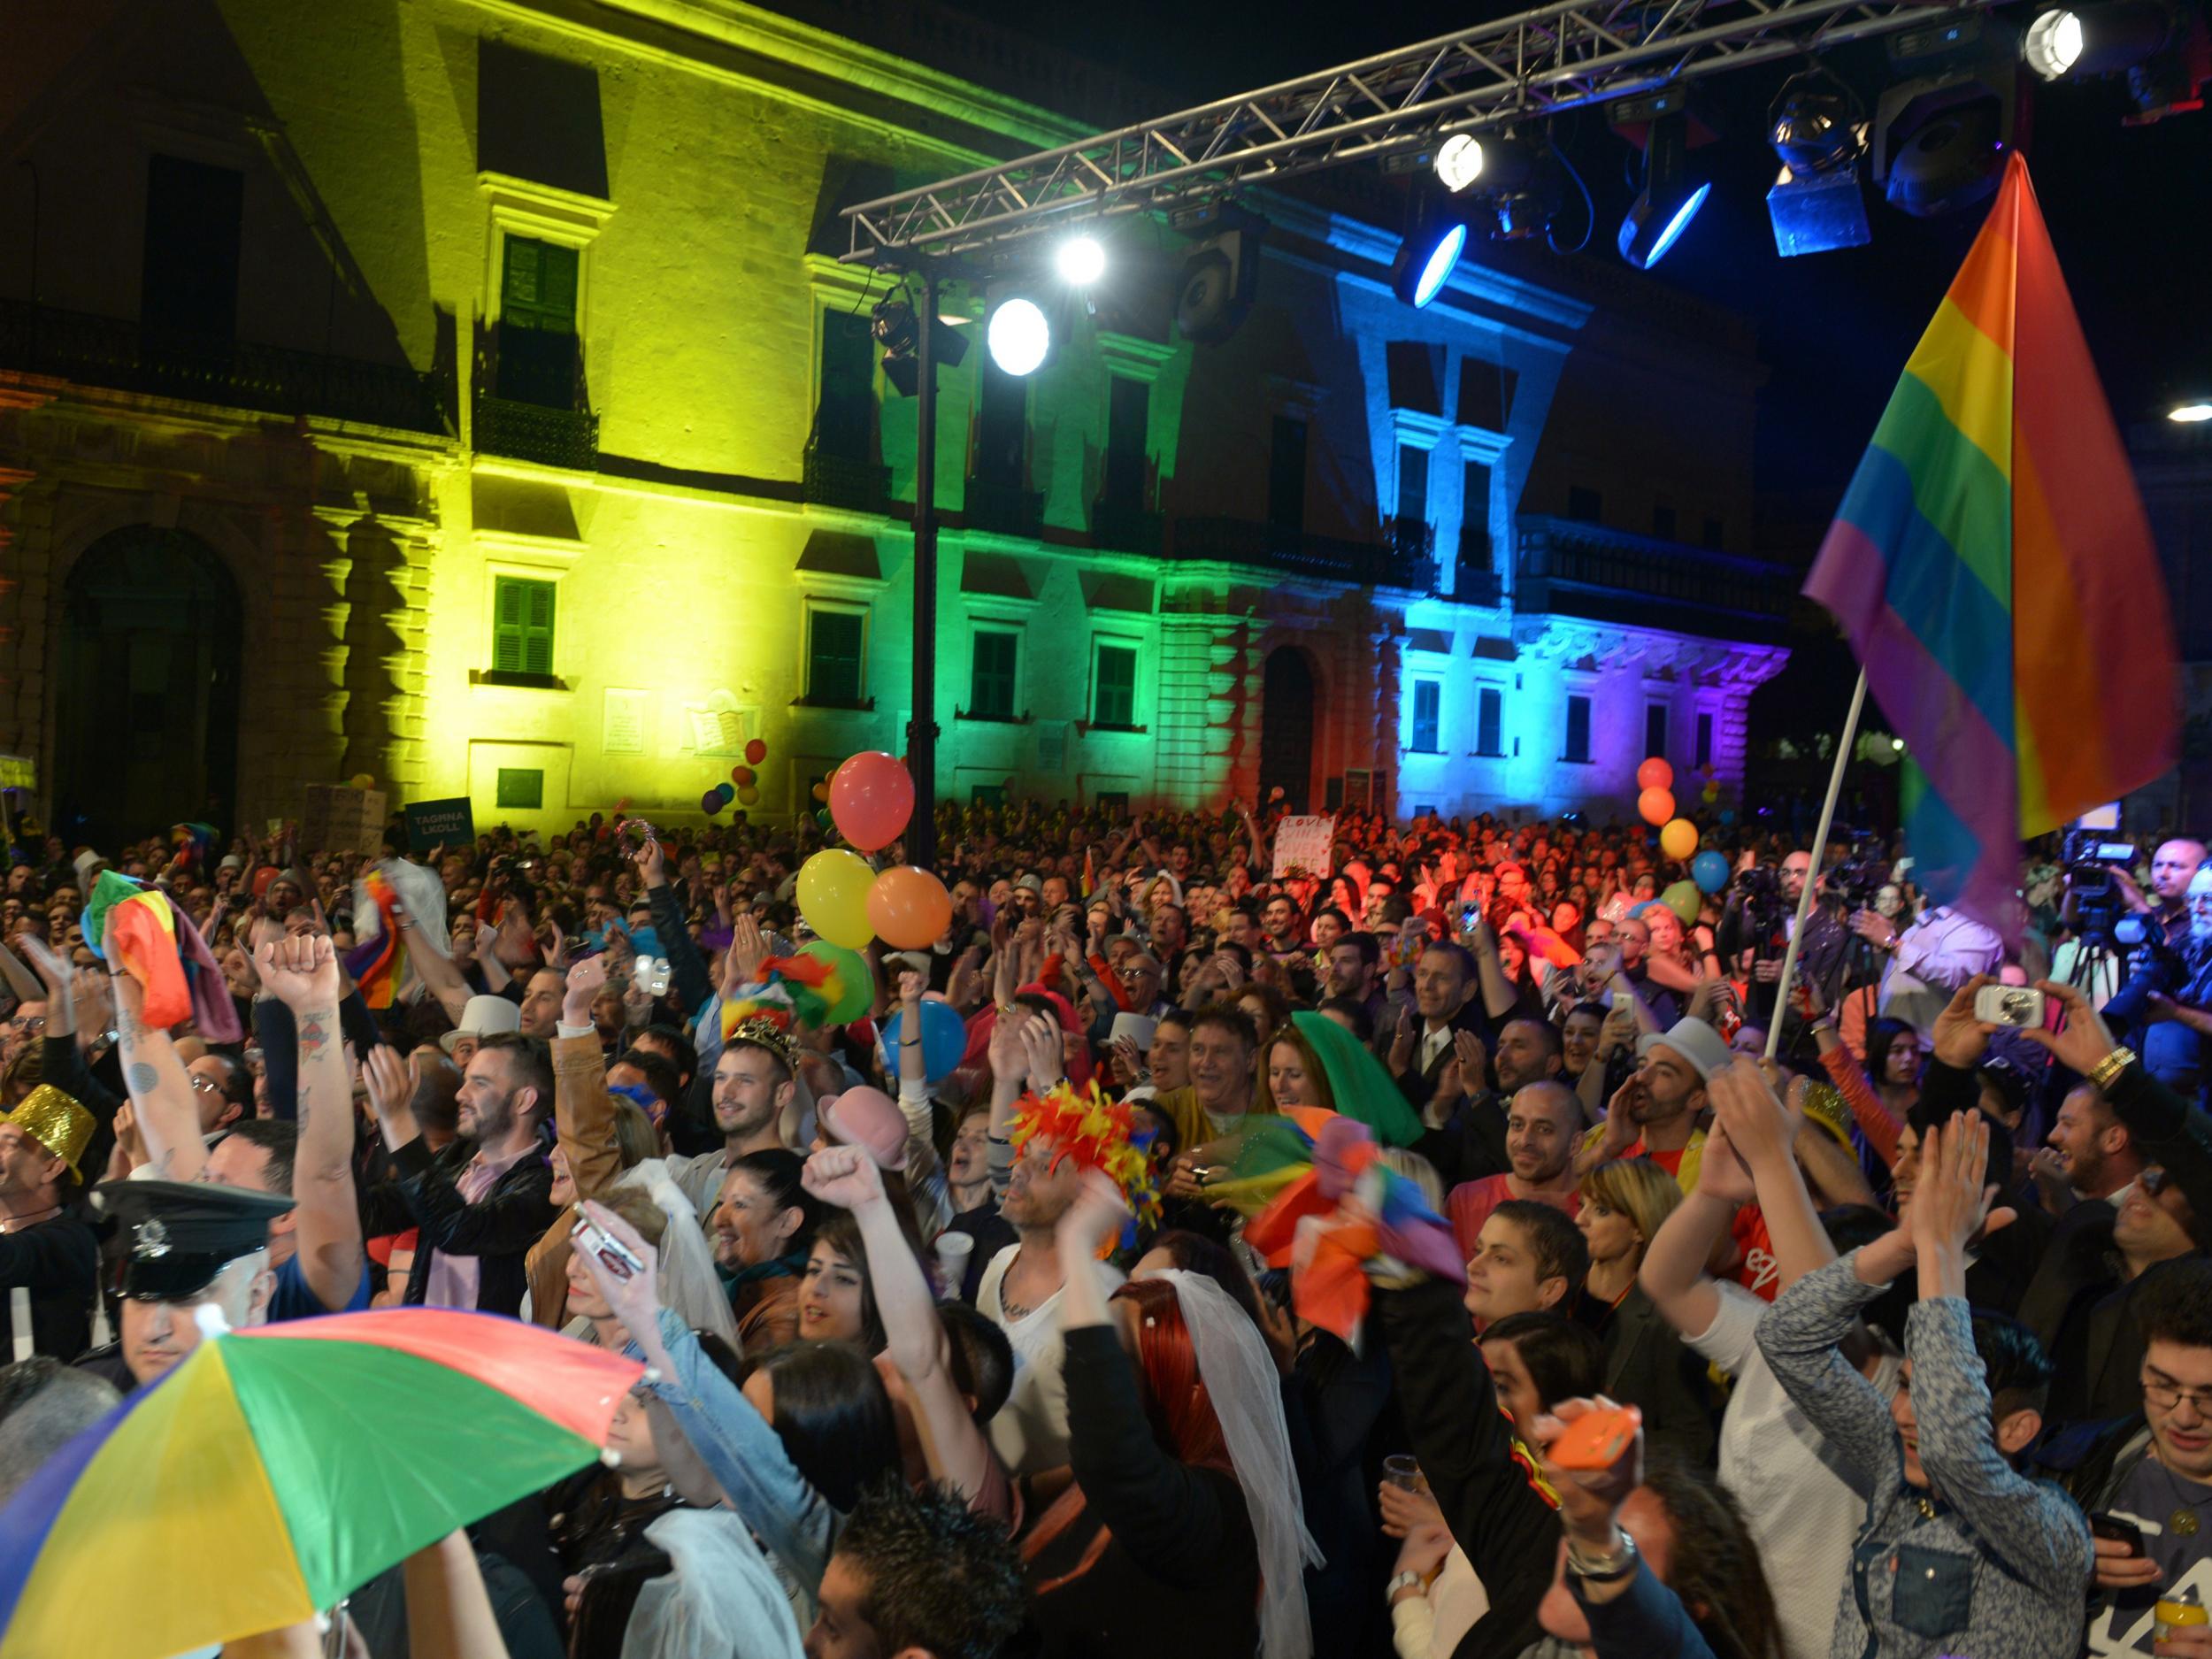 Malta has been named the best country in Europe for LGBT people